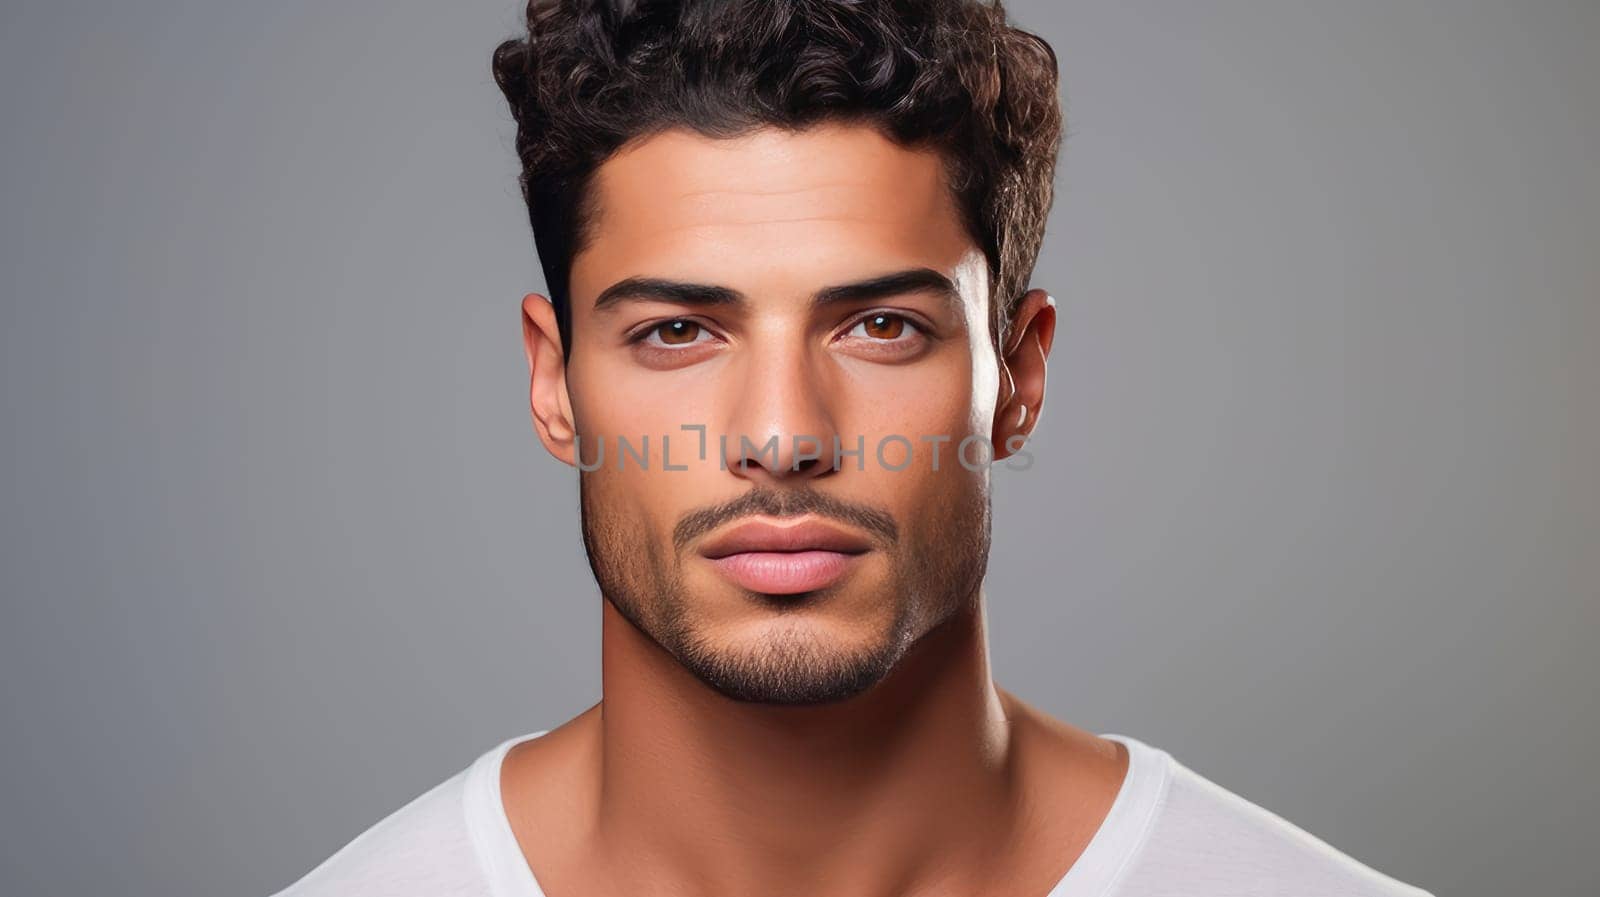 Portrait of an elegant sexy handsome serious Latino man with perfect skin, on a gray background. Advertising of cosmetic products, spa treatments shampoos and hair care products, dentistry and medicine, perfumes and cosmetology for men